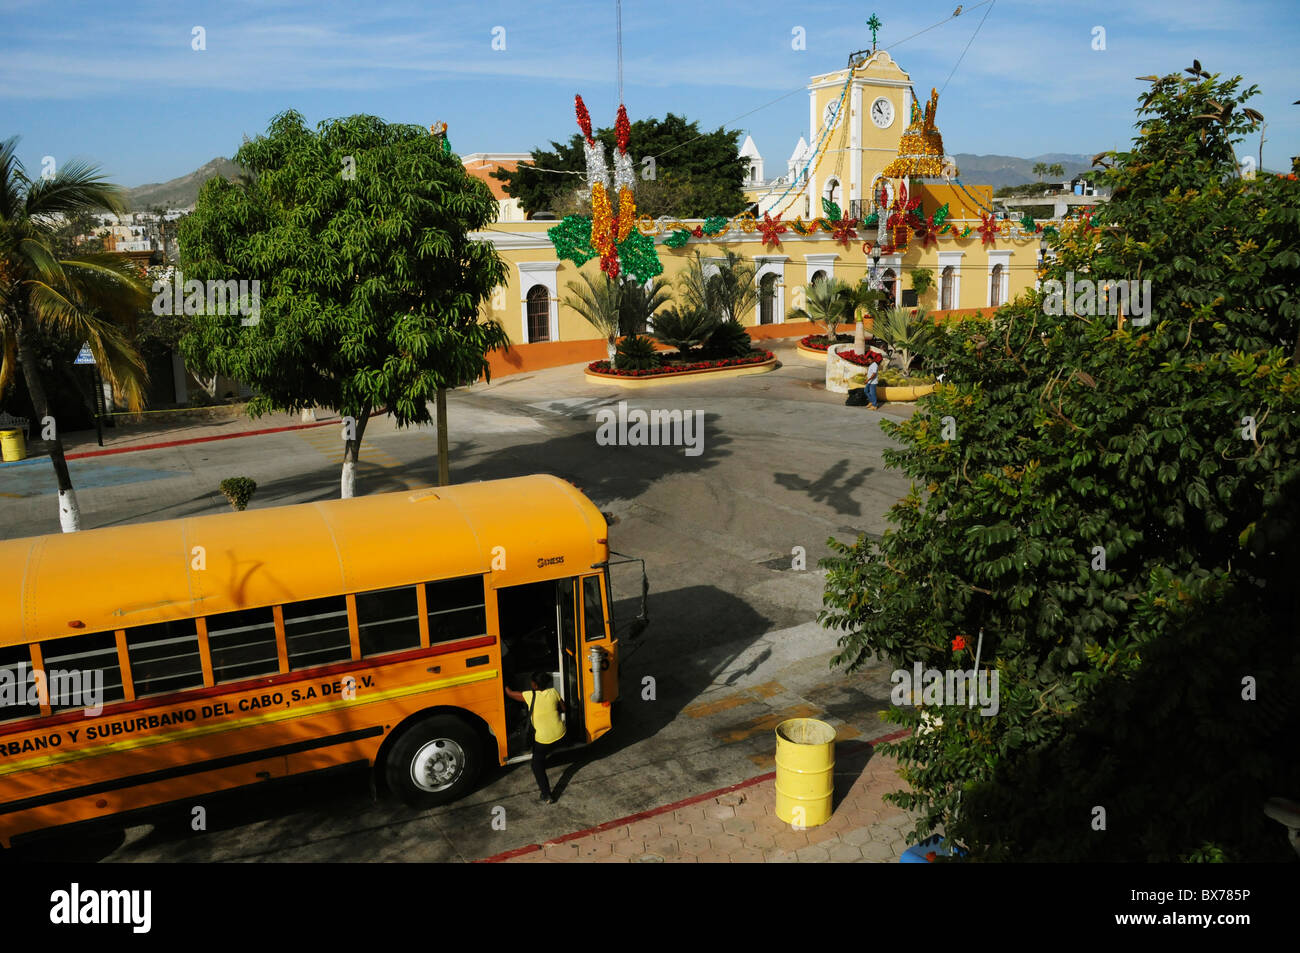 Coastal resort of San Jose del Cabo, Mexico with central square and town hall plaza Stock Photo